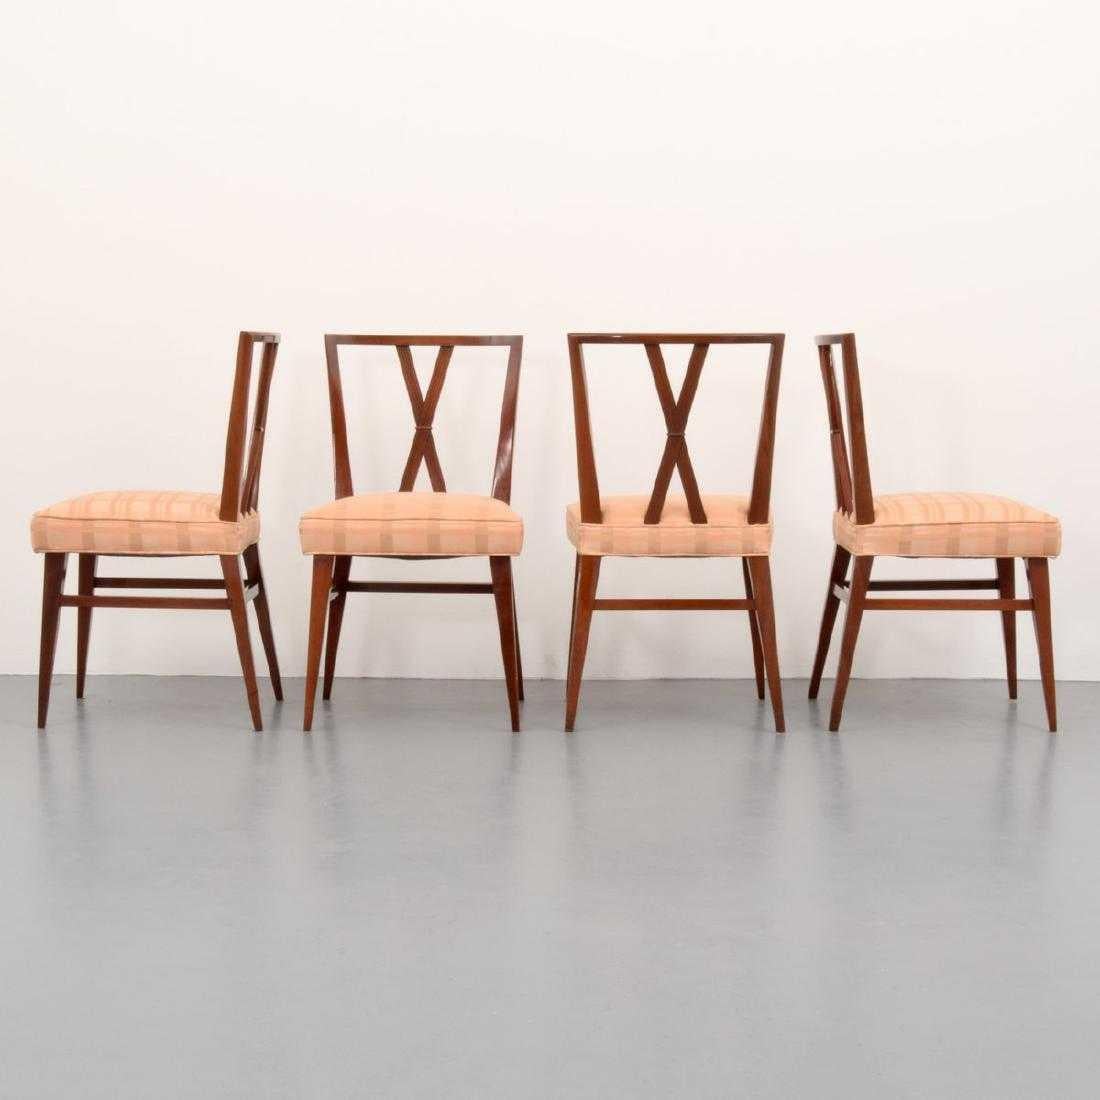 Dining table and 4 chairs by Tommi Parzinger for Charak Modern. Table has brass sabots. 

Markings: Charak stamp and label (table)

Dimensions(H, W, D): table: 29.75